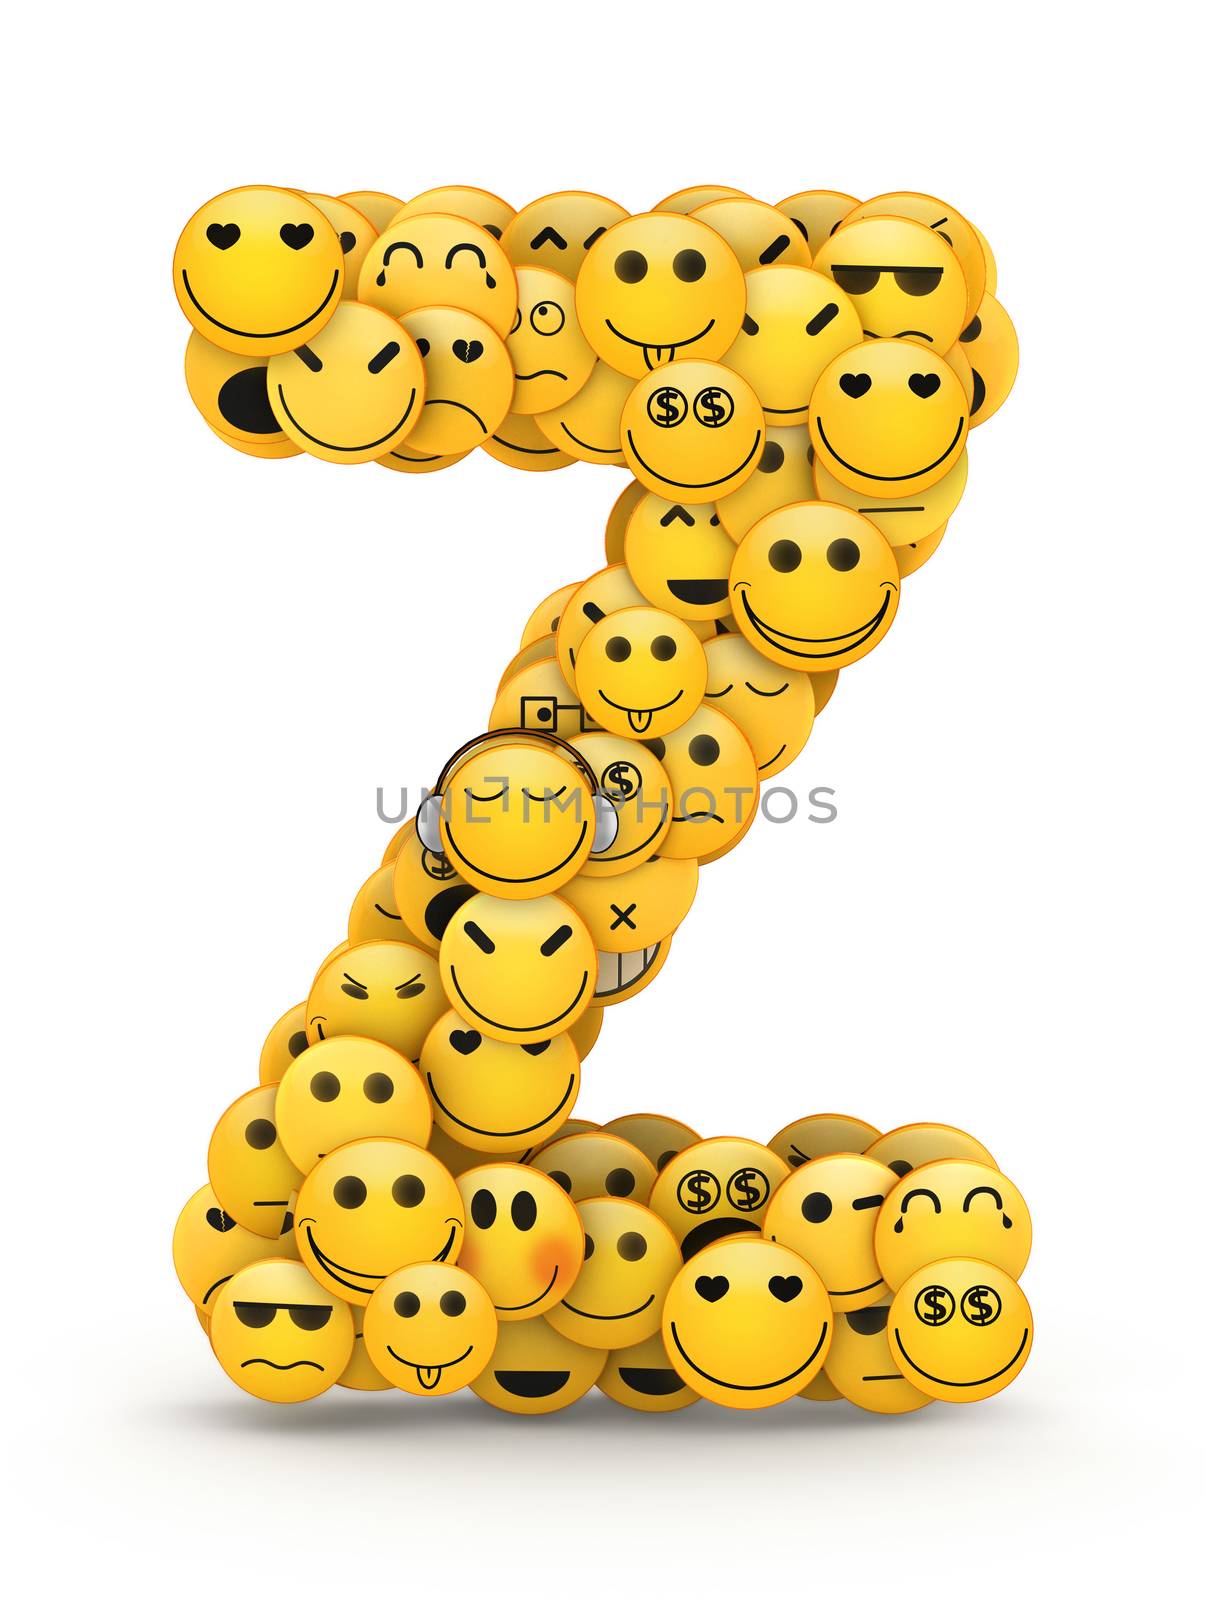 Letter Z compiled from Emoticons smiles with different emotions